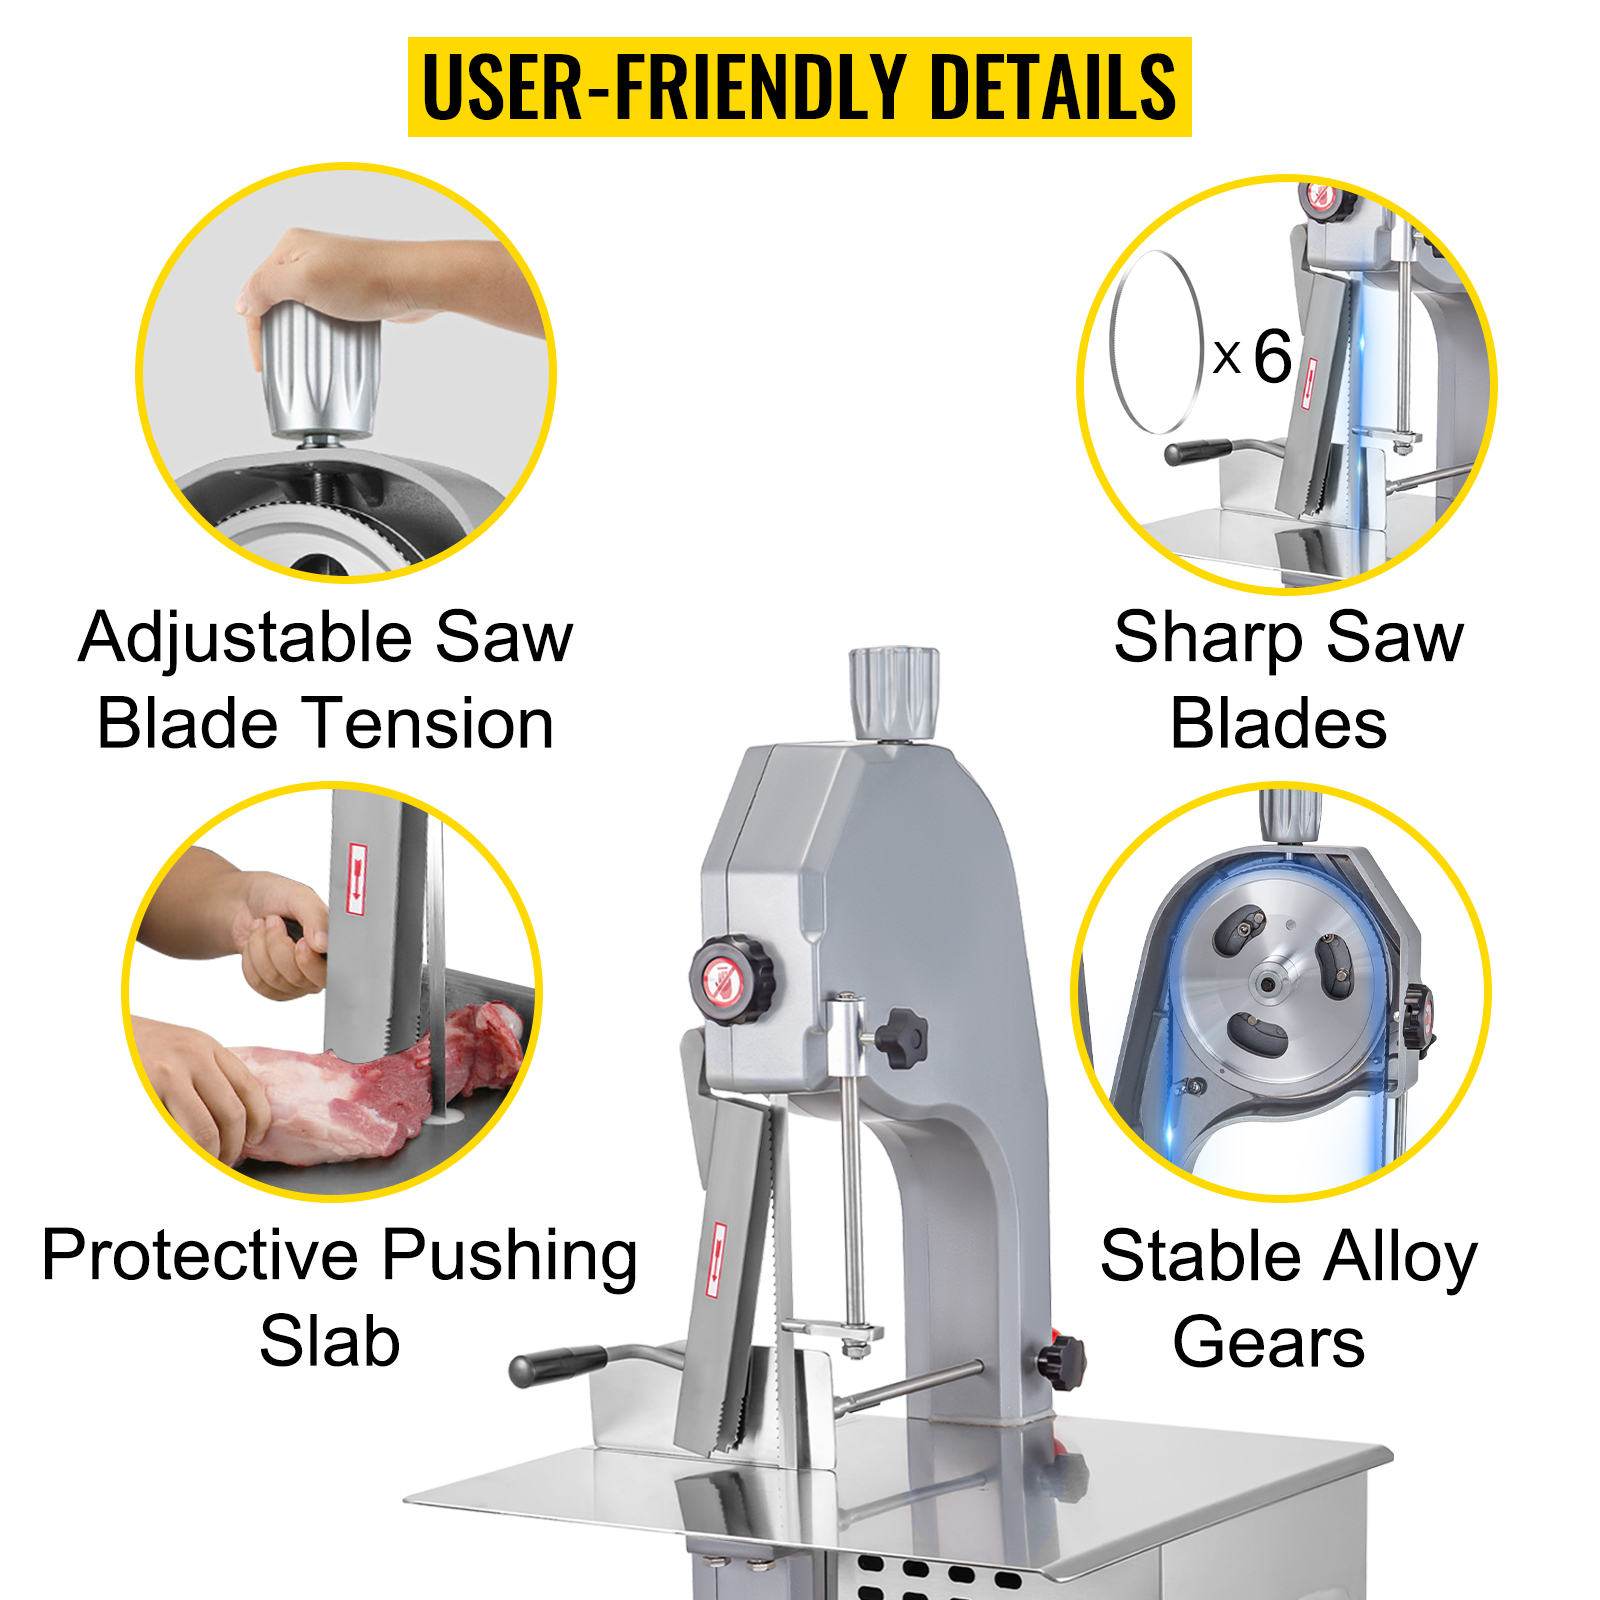 VEVOR 110V Bone Saw Machine, 1500W Frozen Meat Cutter, 2.1HP Butcher  Bandsaw, Thickness Range 4-180mm, Max Cutting Height 215mm, Worktable  19.3x17.3inch, Sawing Speed 19m/s, Equipped with Saw Blades VEVOR US